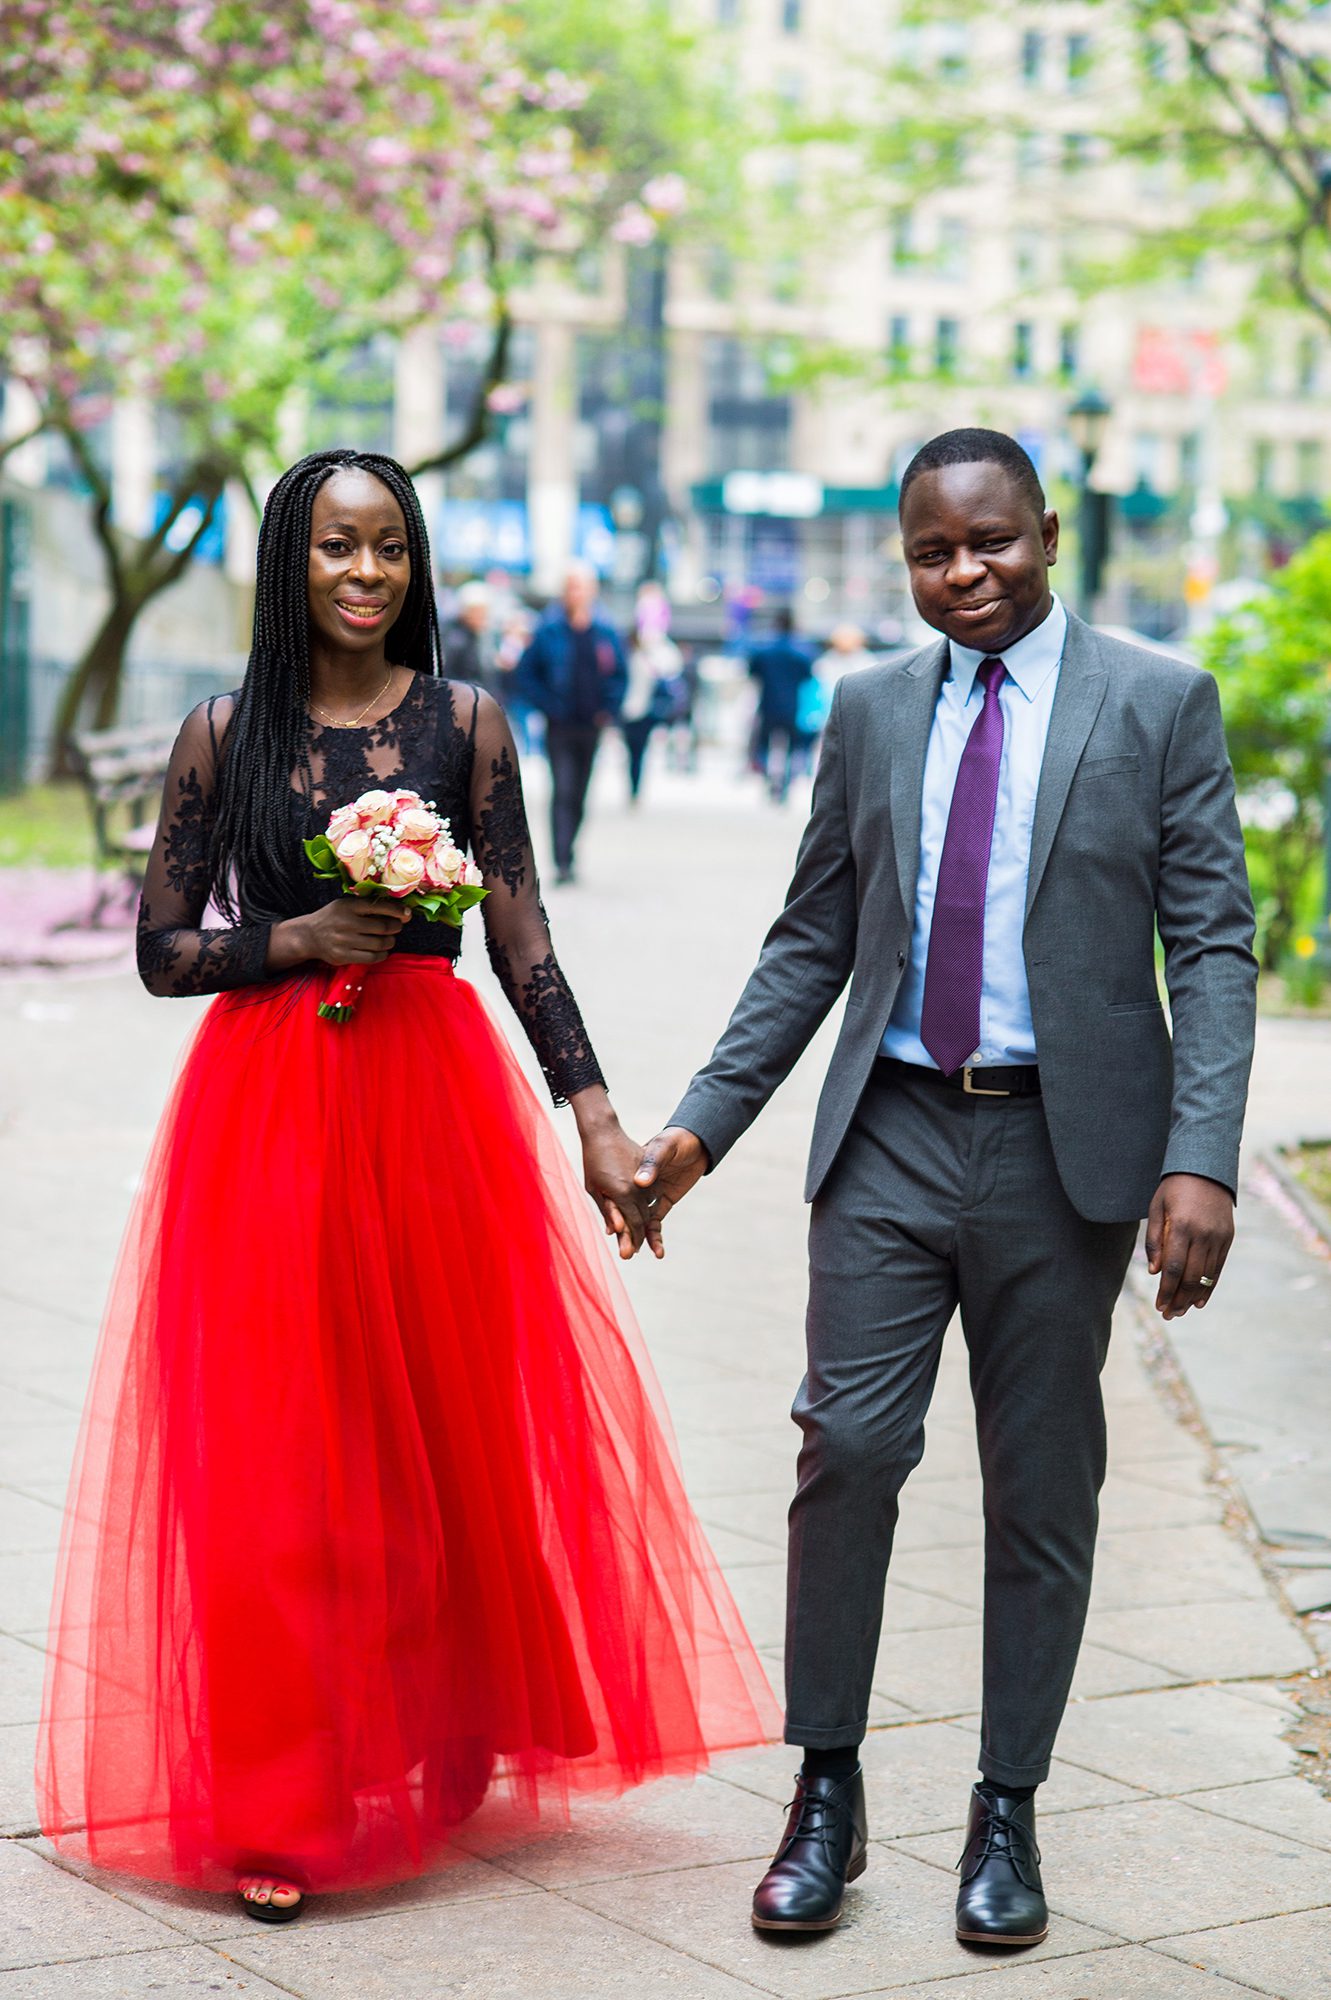 Couple after their City Hall wedding walking. Bride is in a bright red skirt.